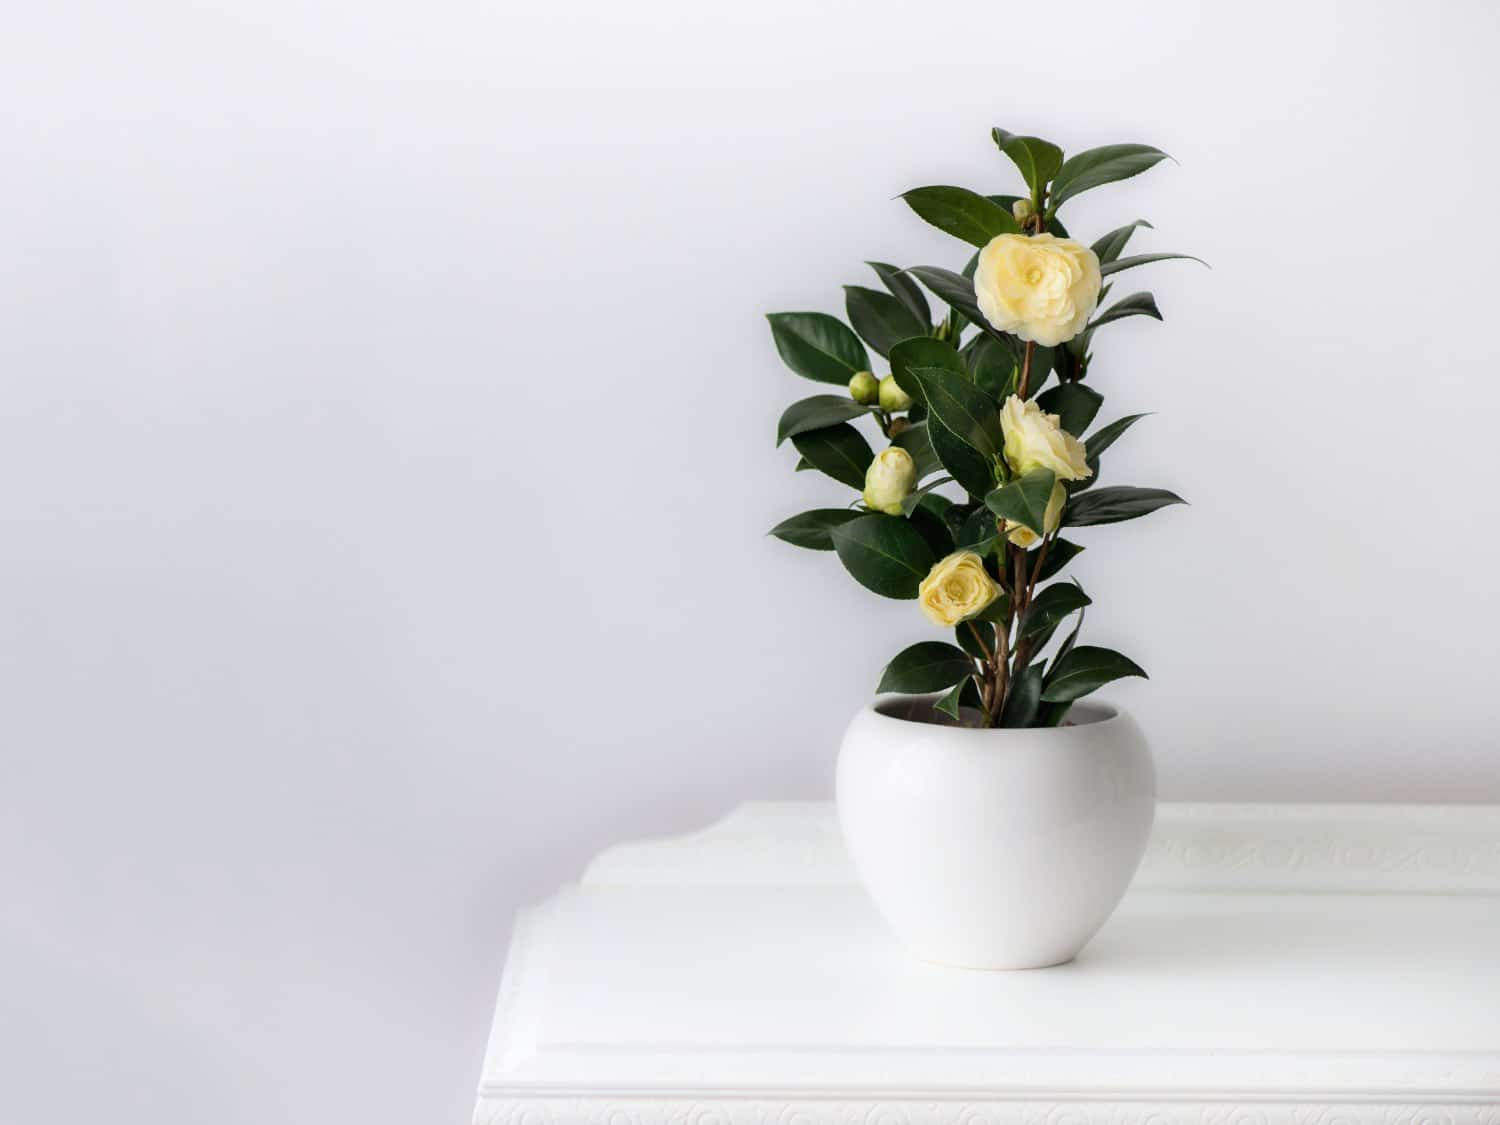 Growing camellia in a pot or container